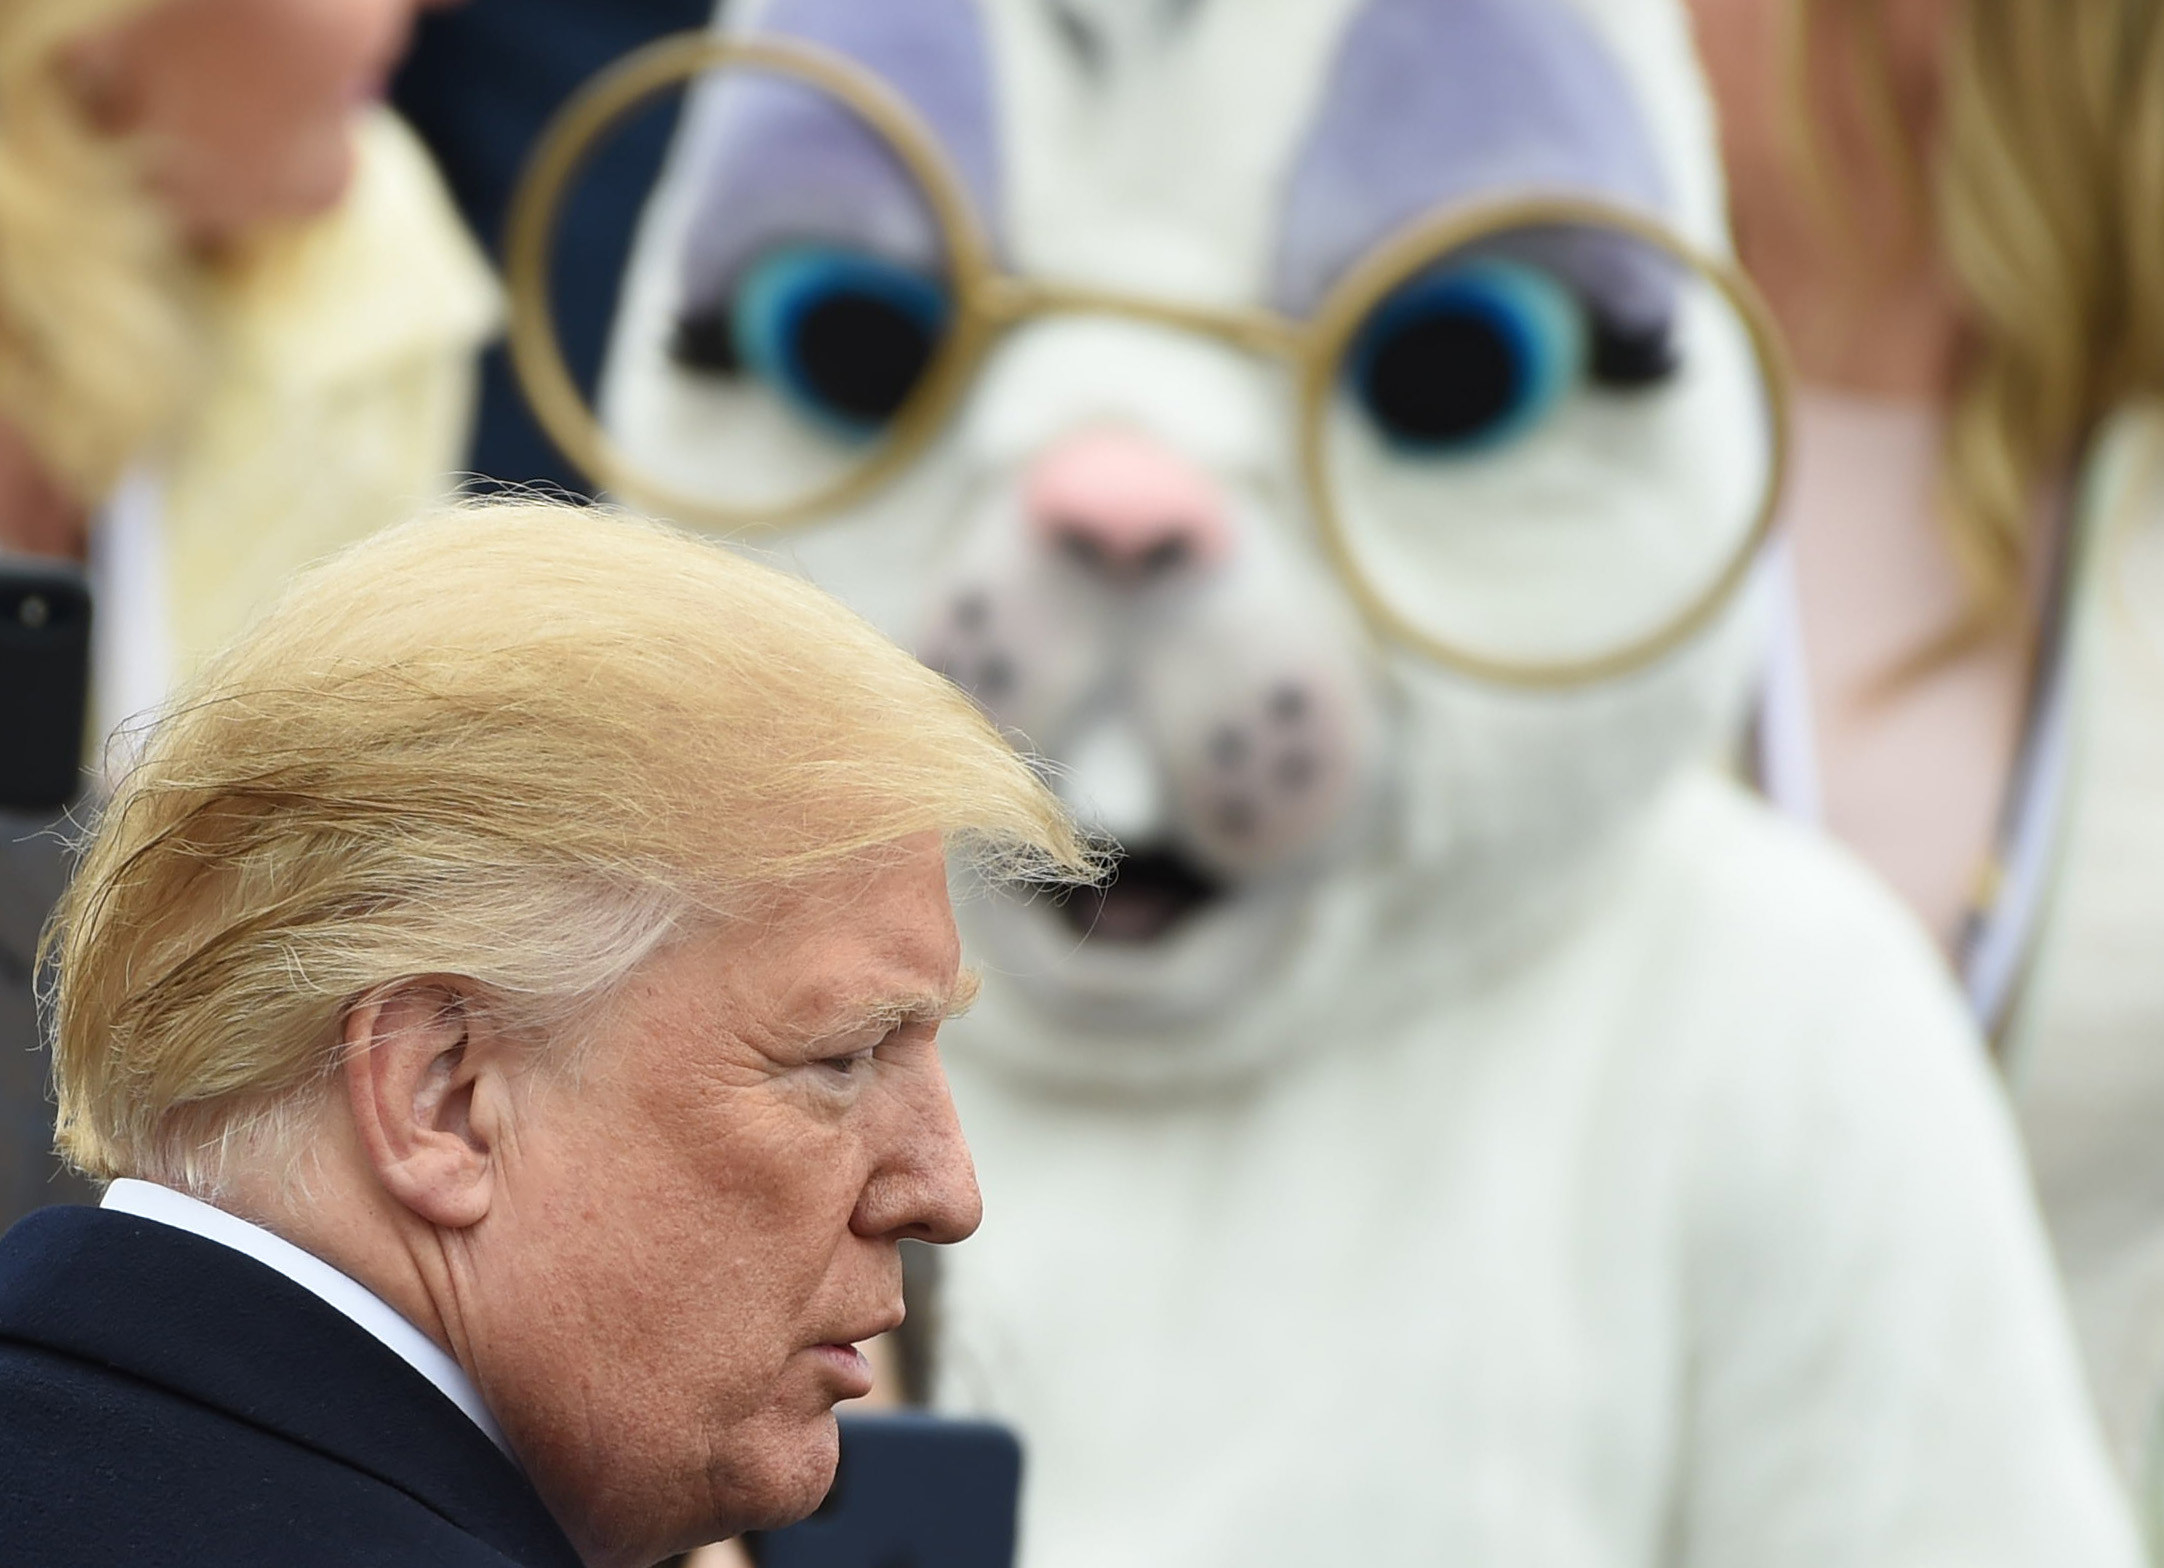 Trump is seen in the foreground and the shocked bunny is seen in the background